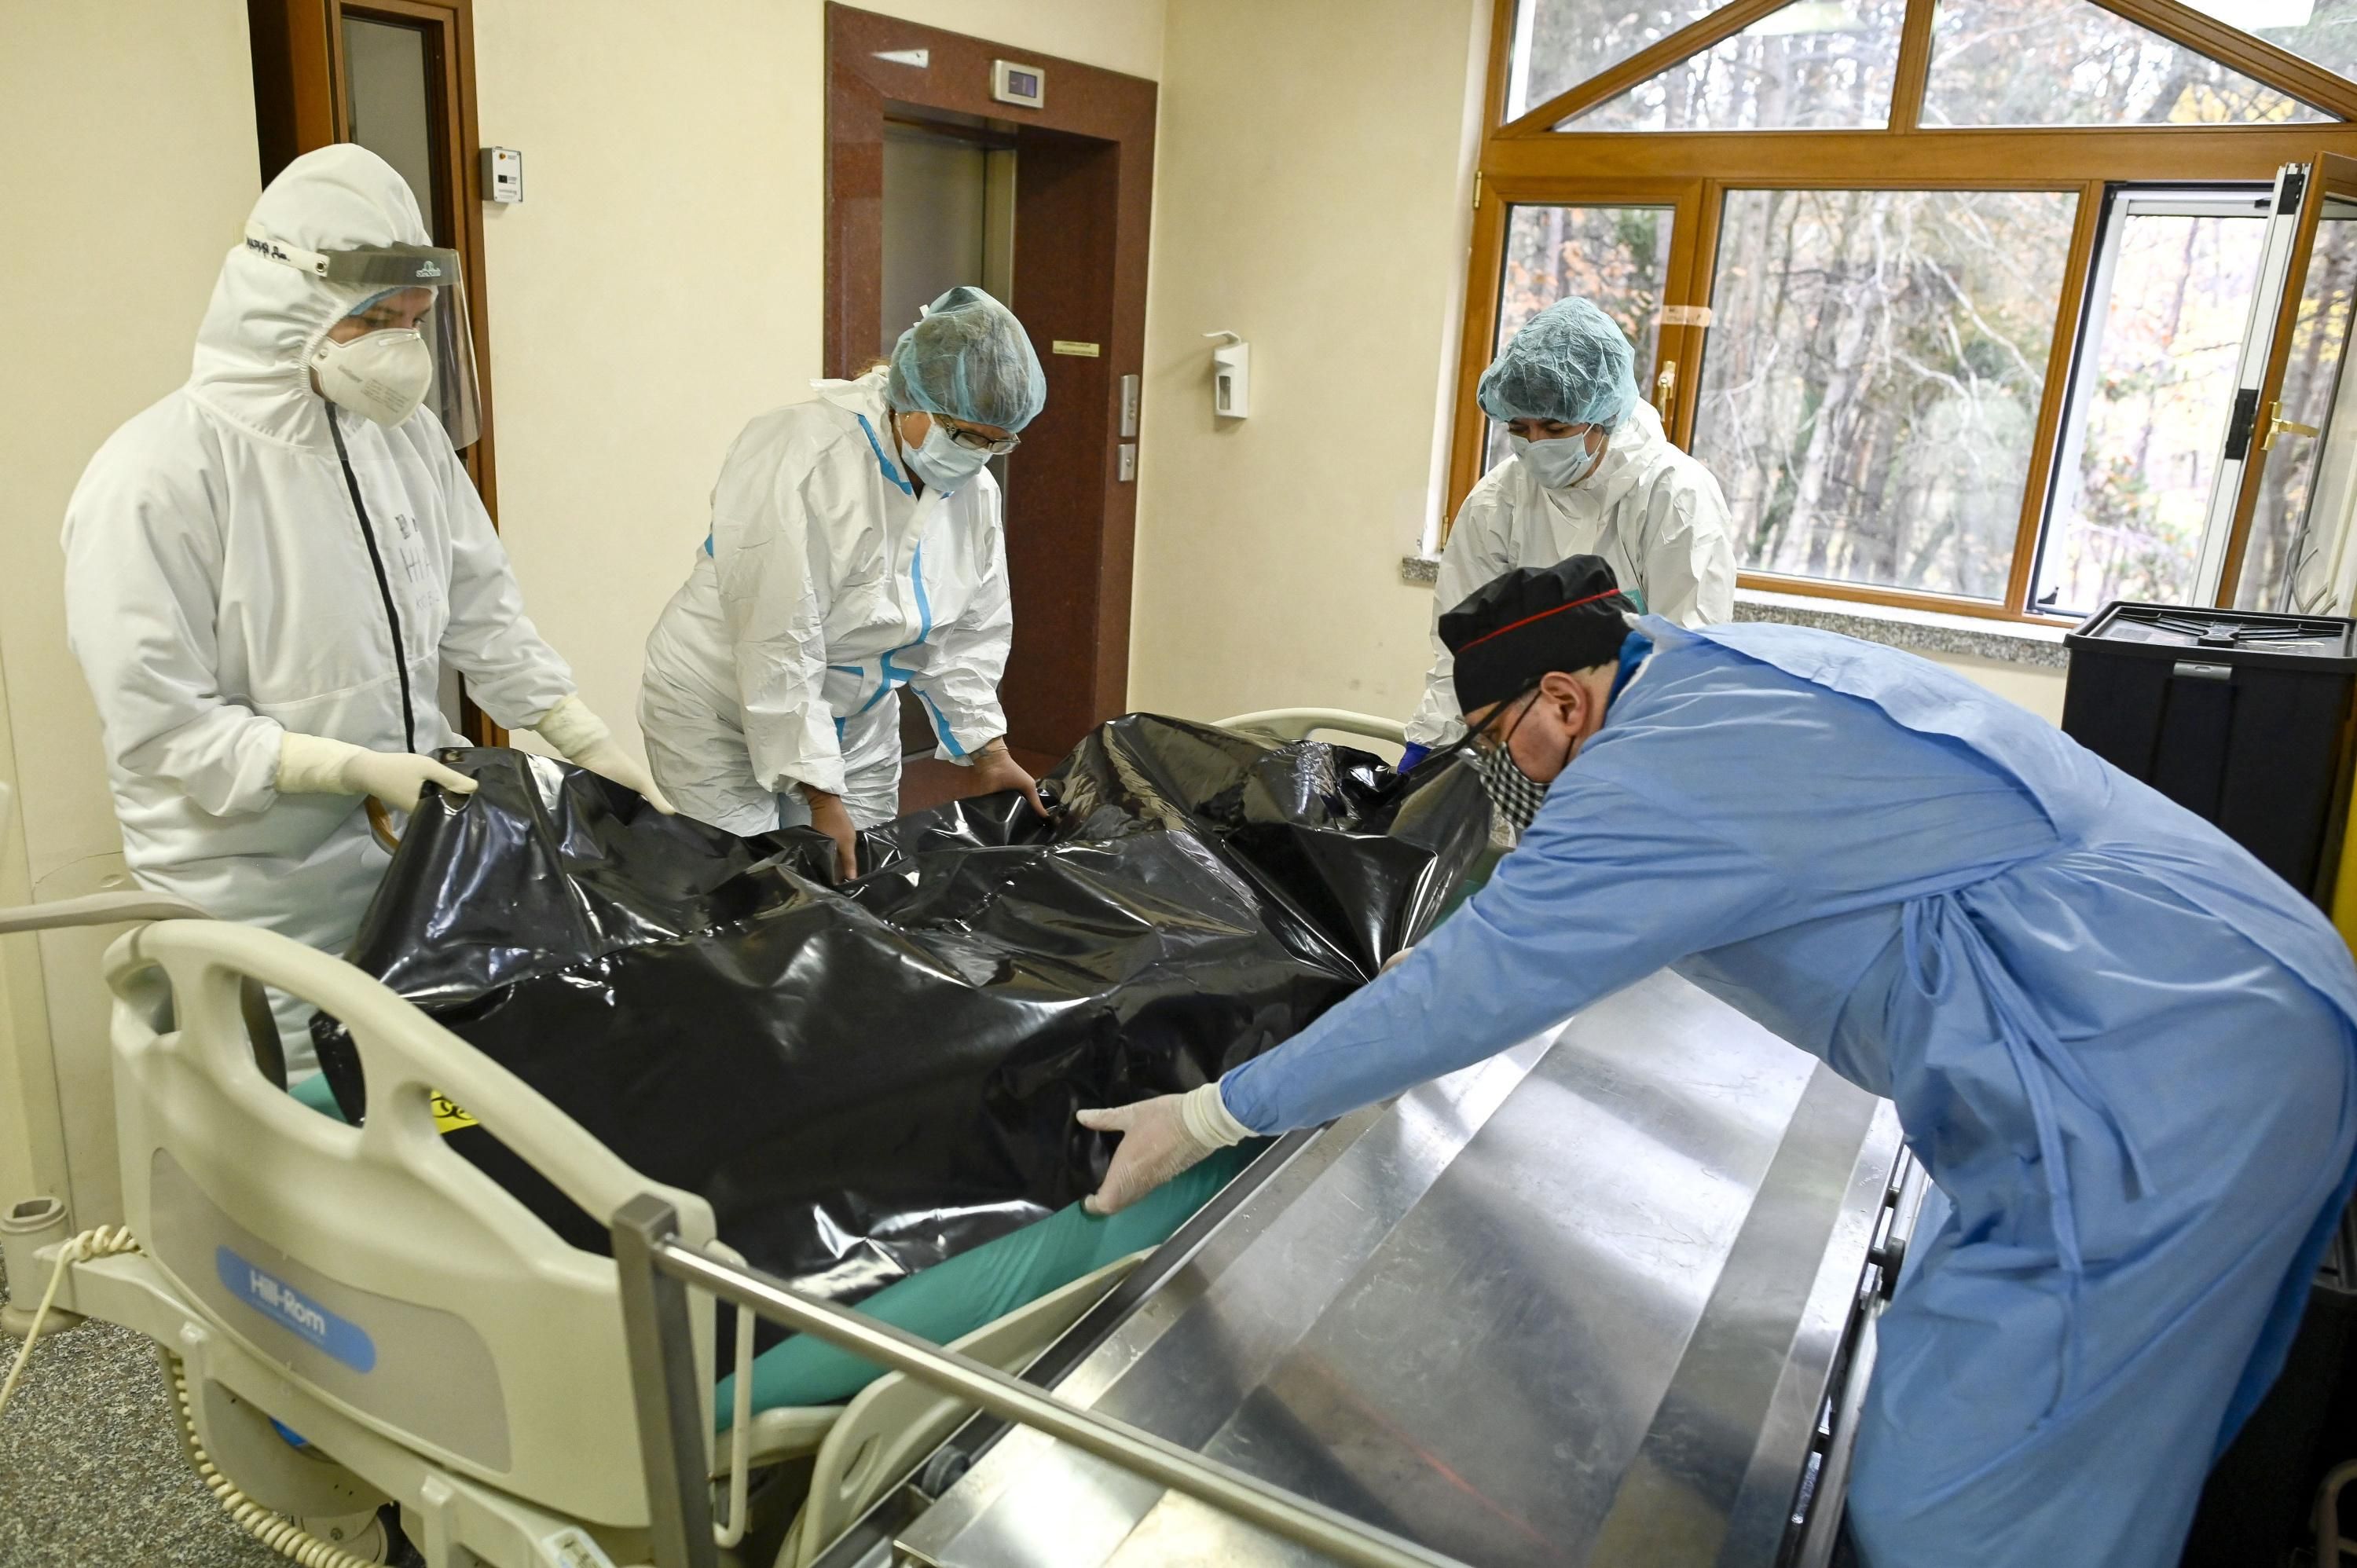 Healthcare workers move the bodybag of a Covid-19 victim.